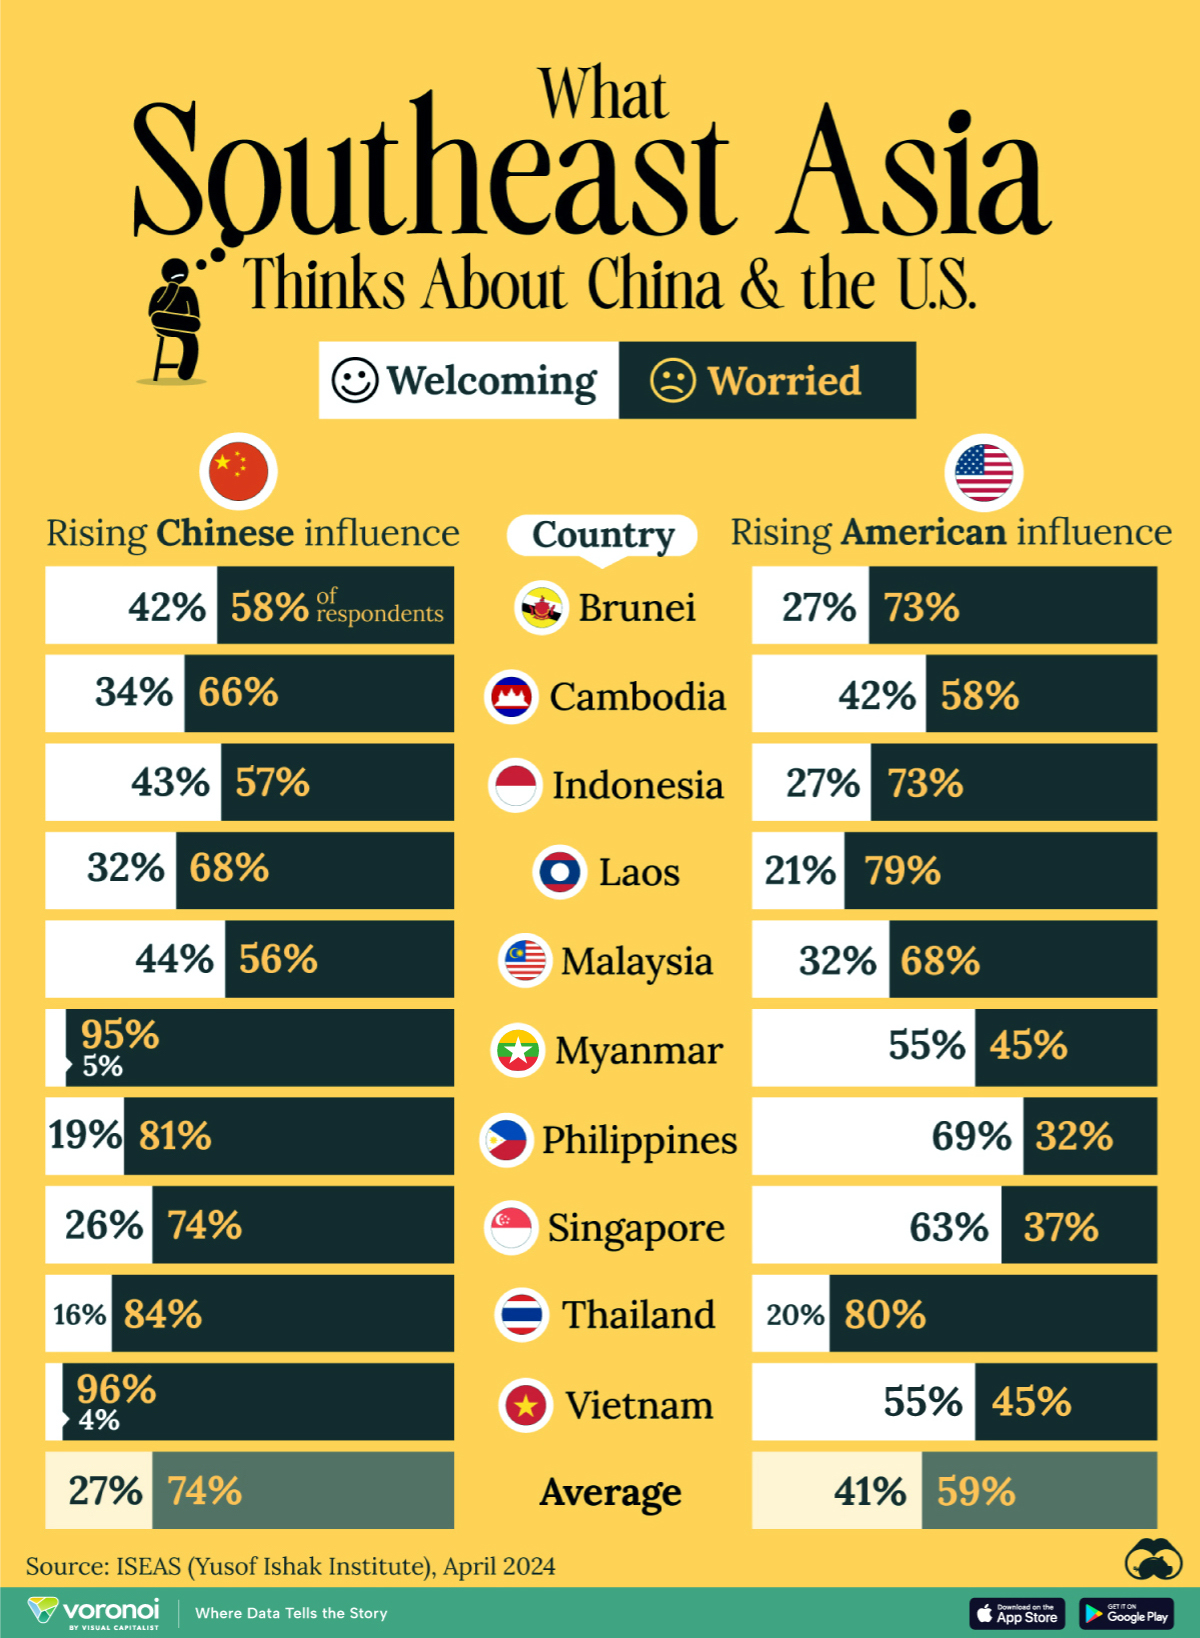 A chart visualizing the results of a 2024 survey where respondents were asked if they were worried or welcoming of rising Chinese and American geopolitical influence in their country.